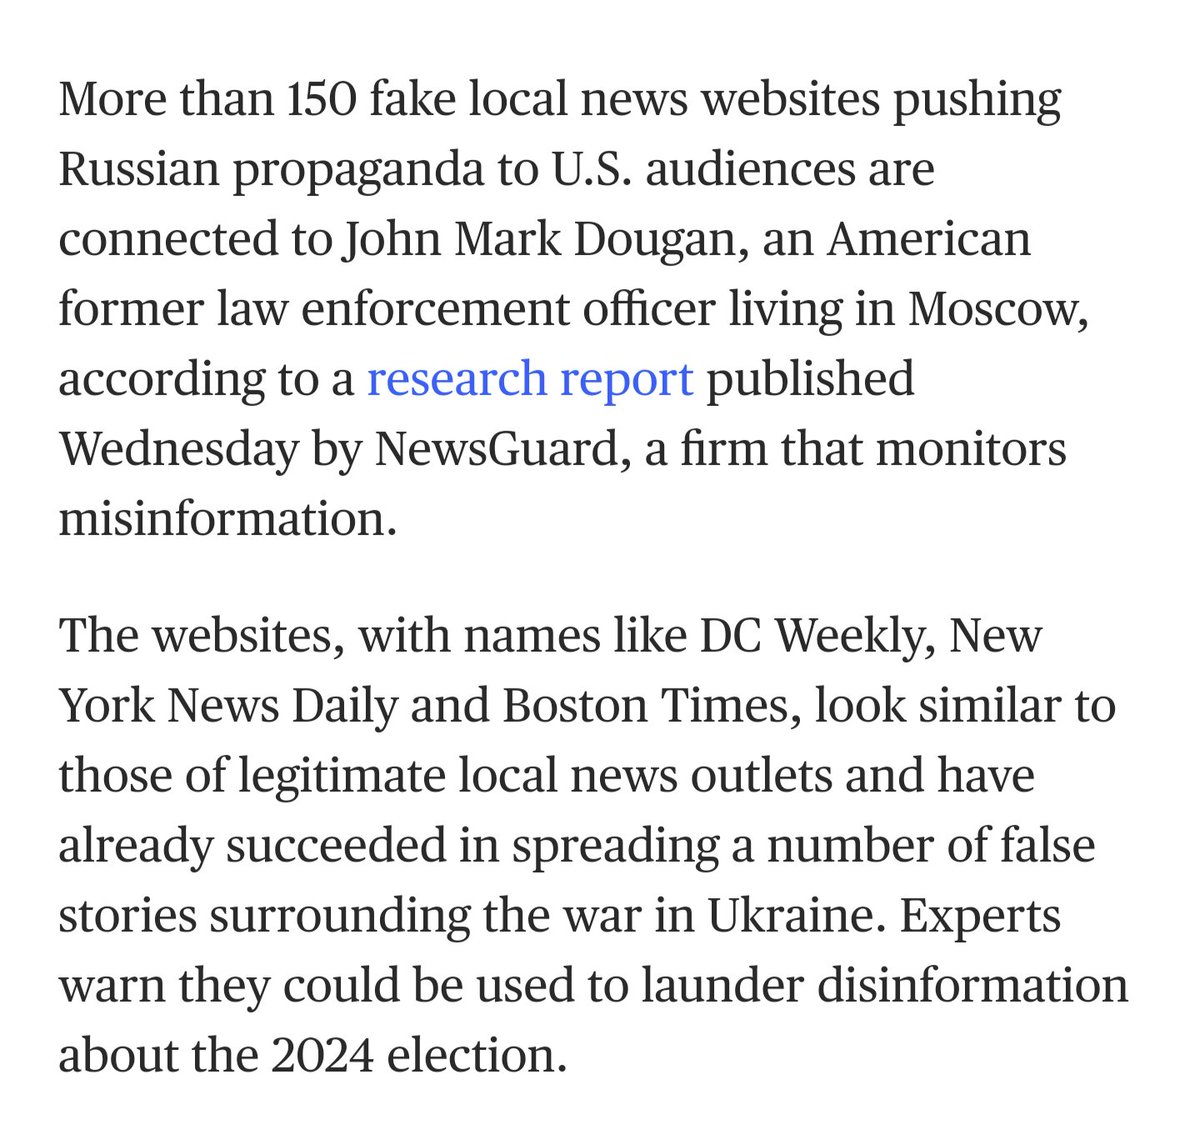 Florida man: Fugitive John Mark Dougan fled to Moscow and runs more than 150 pro-Russia/pro-Trump disinformation sites targeting Americans. Previously a US Marine and Sheriff's Deputy, he fled to Russia after committing election fraud and numerous other crimes.